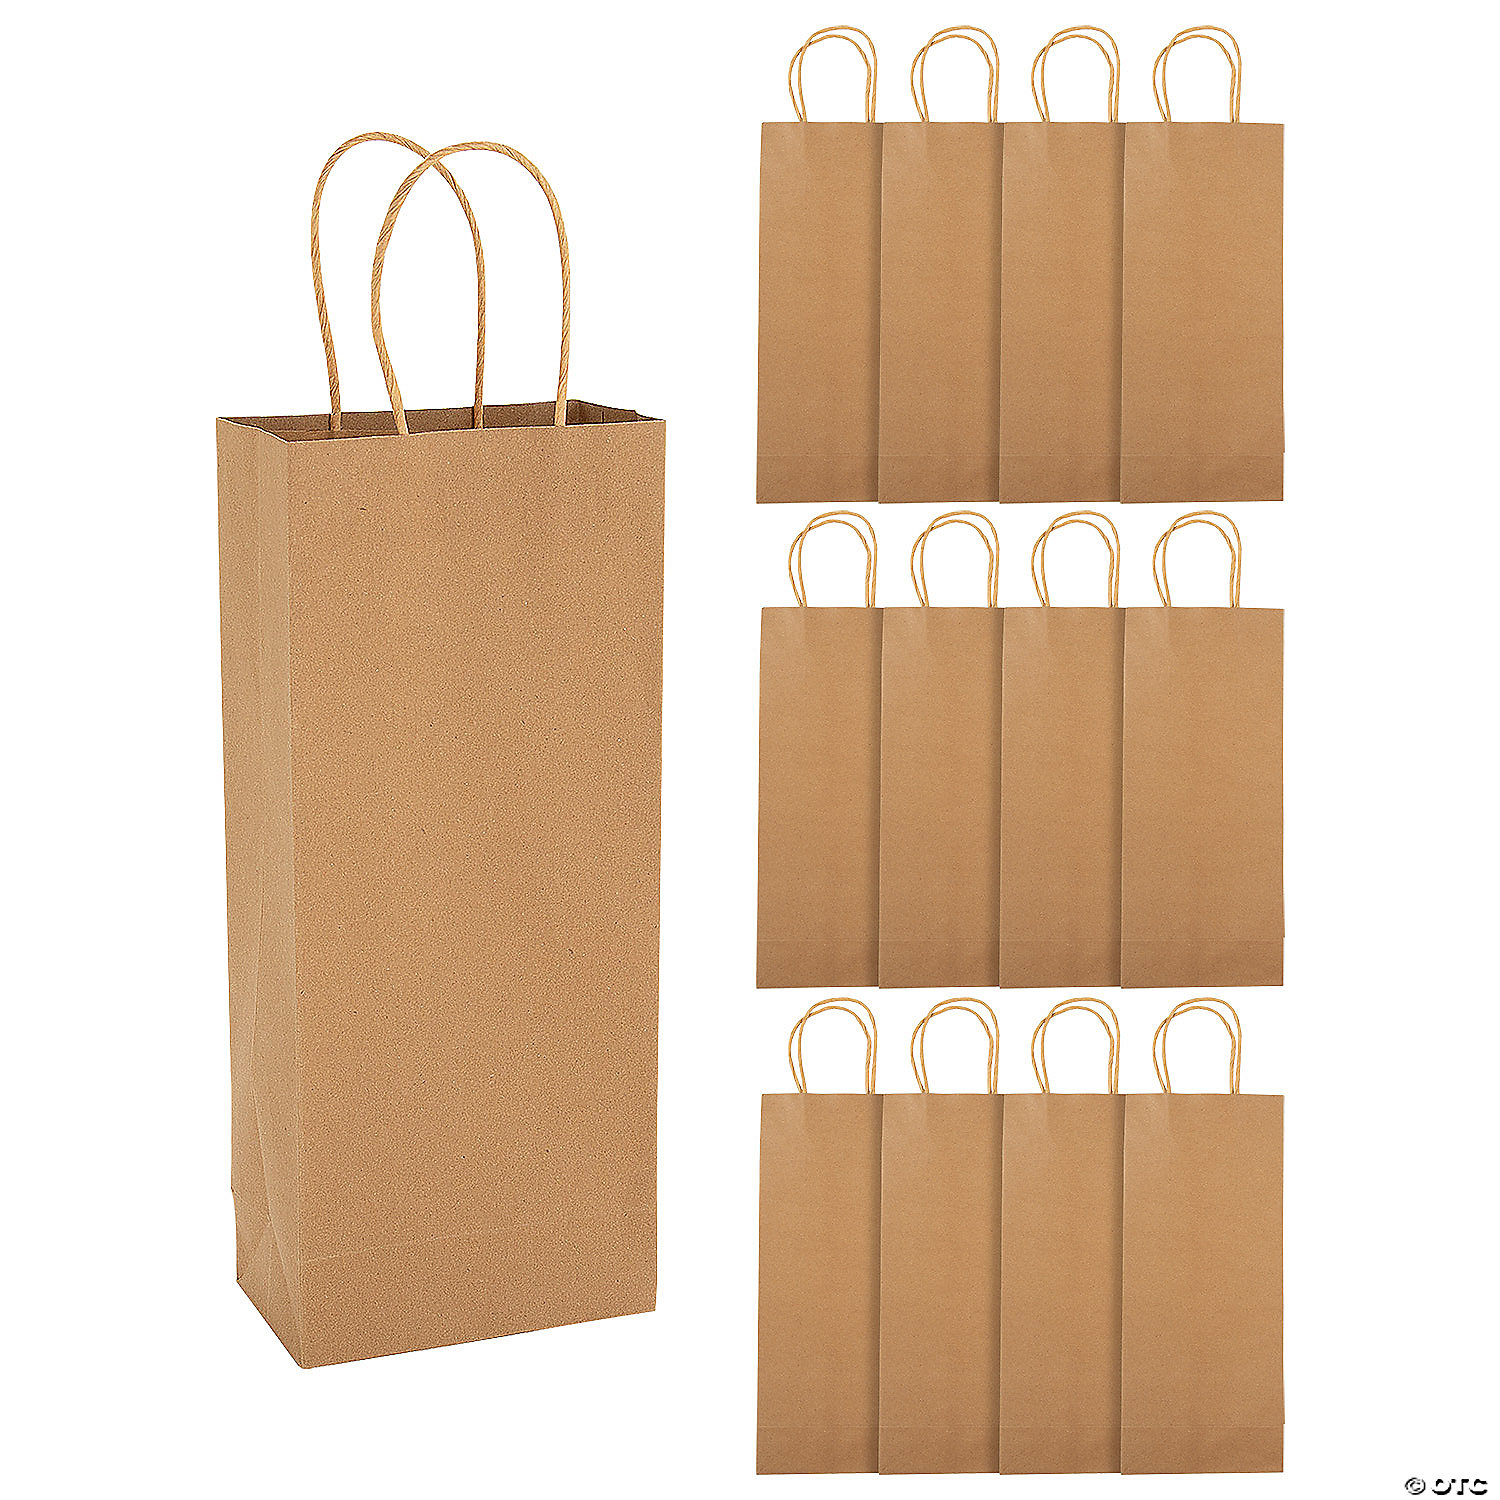 Shopping Sdootjewelry 36 Pcs Wine Gift Bags with Handles Party Kraft Paper Wine Bag Single Bottle Paper Wine Bag Bulk for Christmas Retail Merchandise-Red 